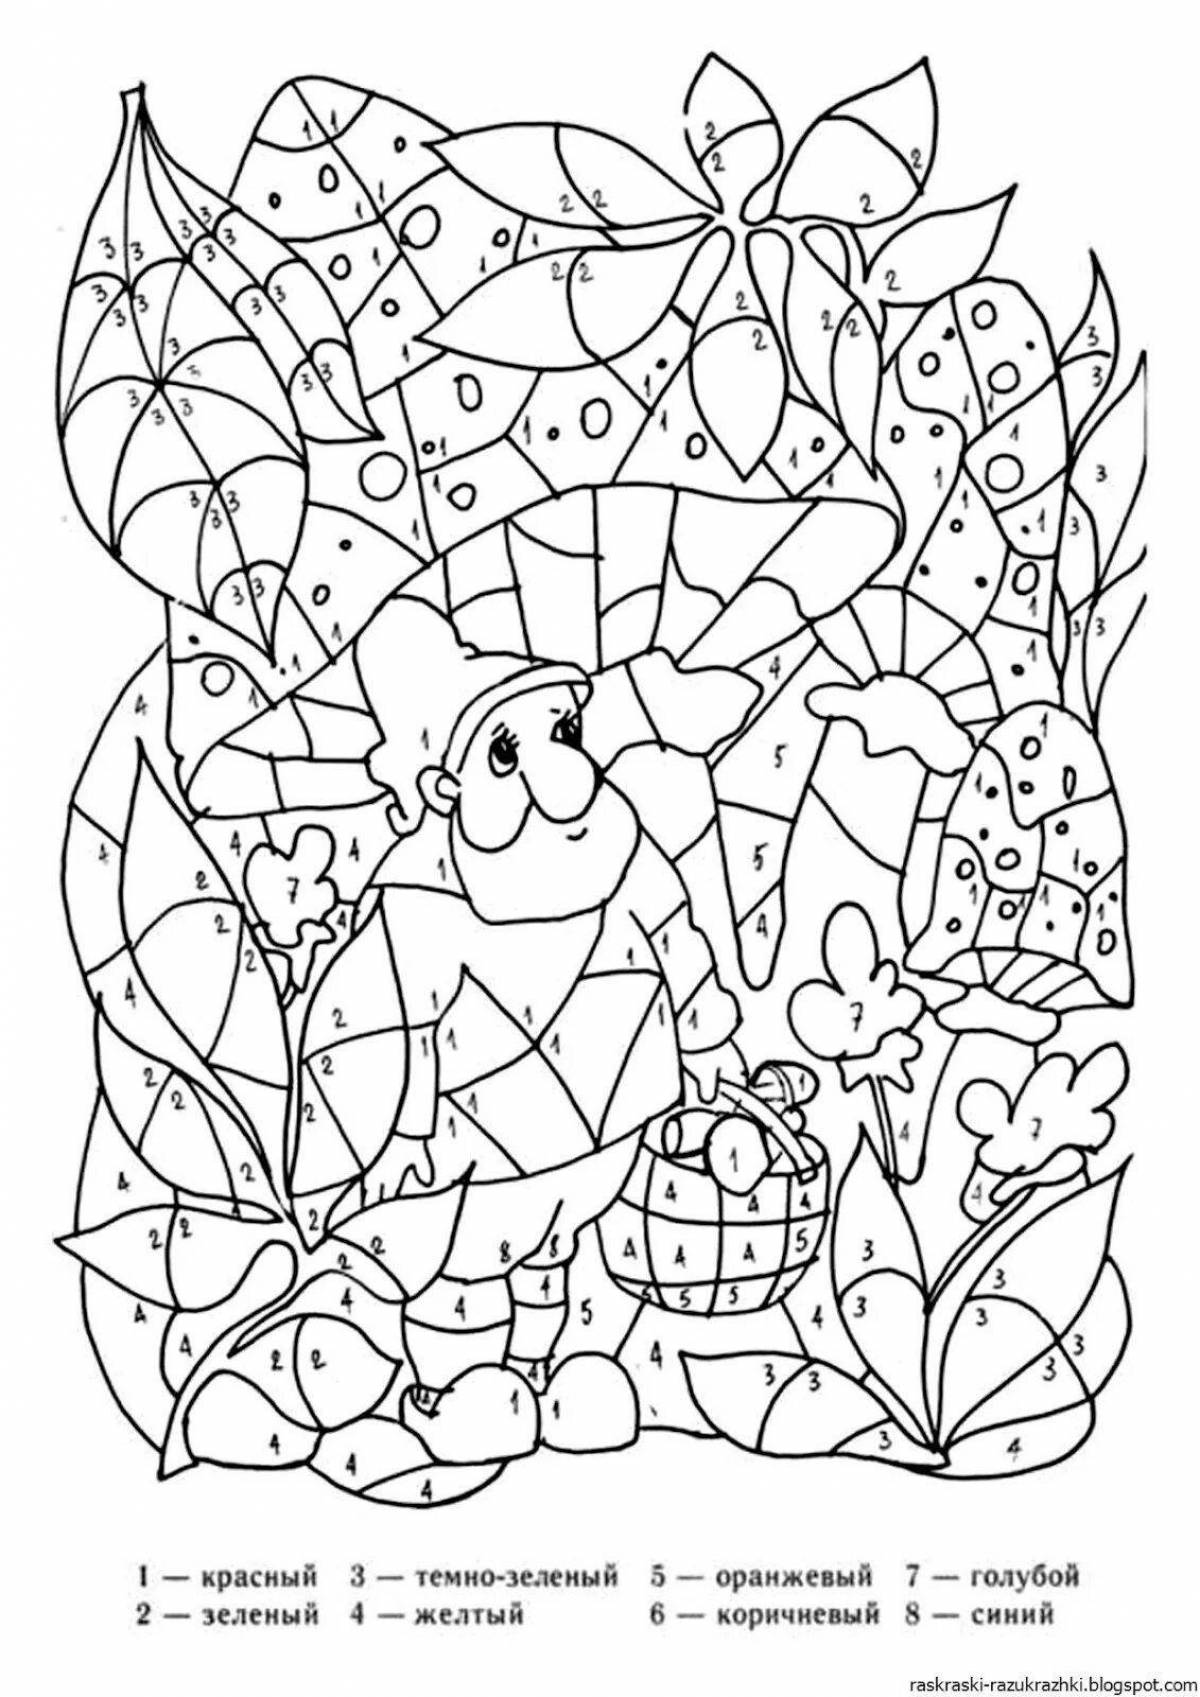 Color-frenzy coloring by numbers for girls 6-7 years old